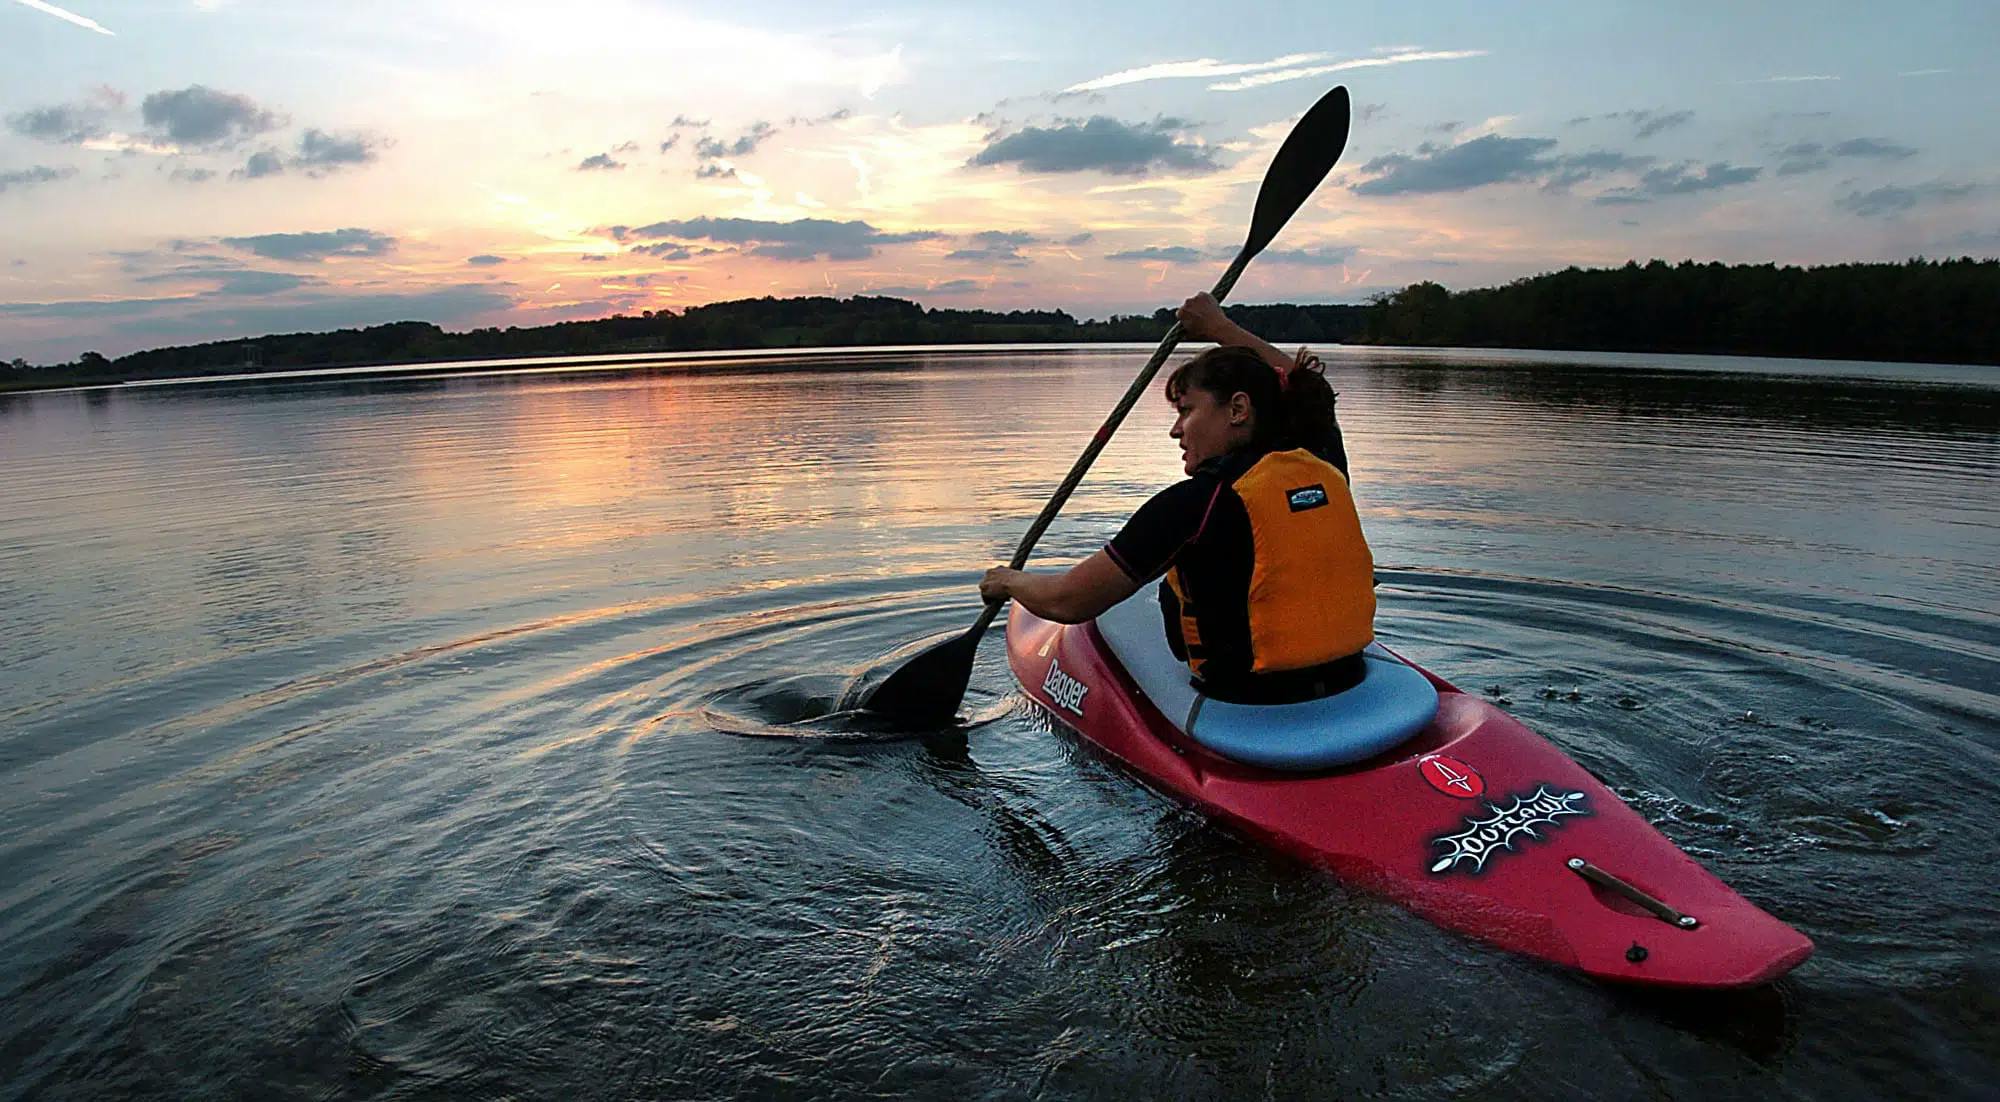 What to wear kayaking for women?